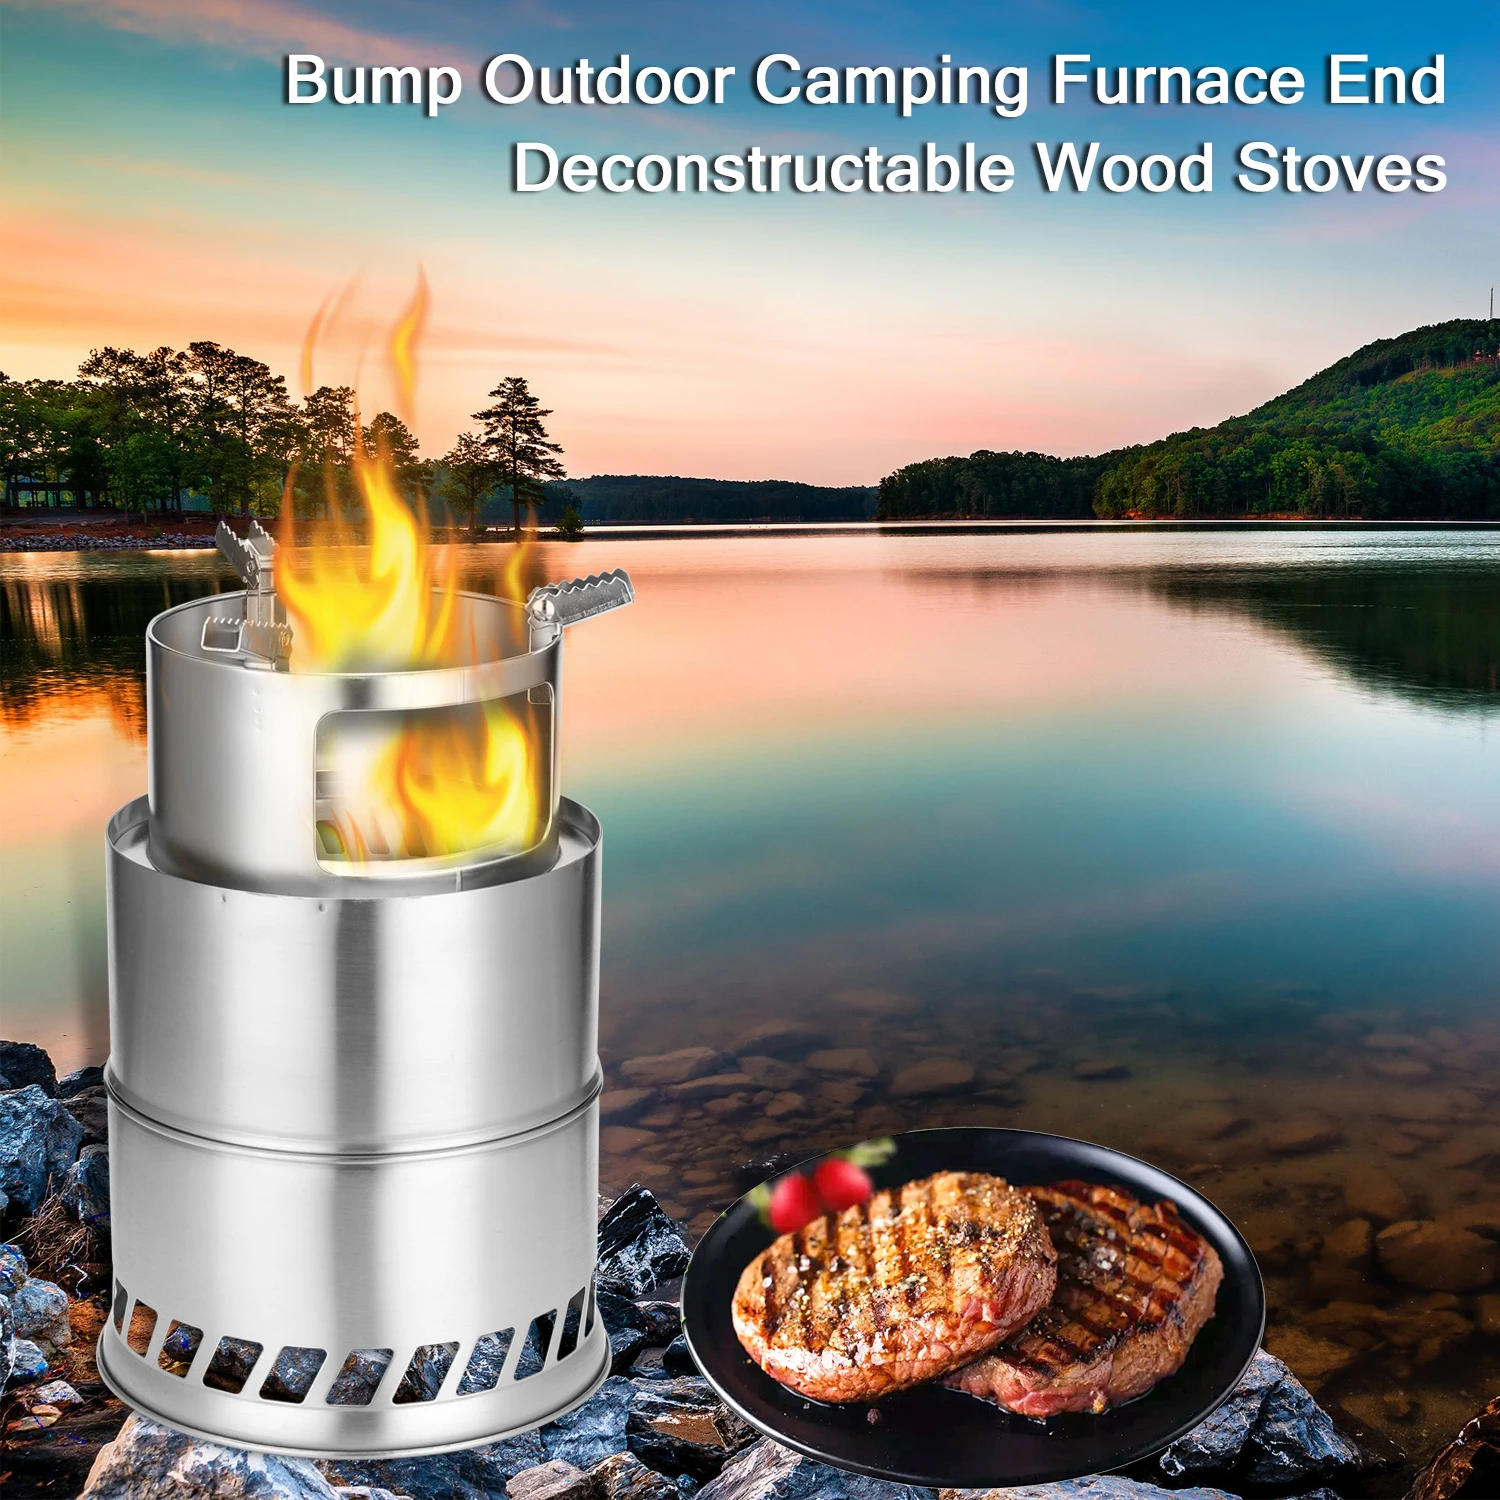 Bump Outdoor Camping Furnace End Deconstructable Wood Stoves Picnic Barbecue Stoves Cross Border Detachable Wood Burner